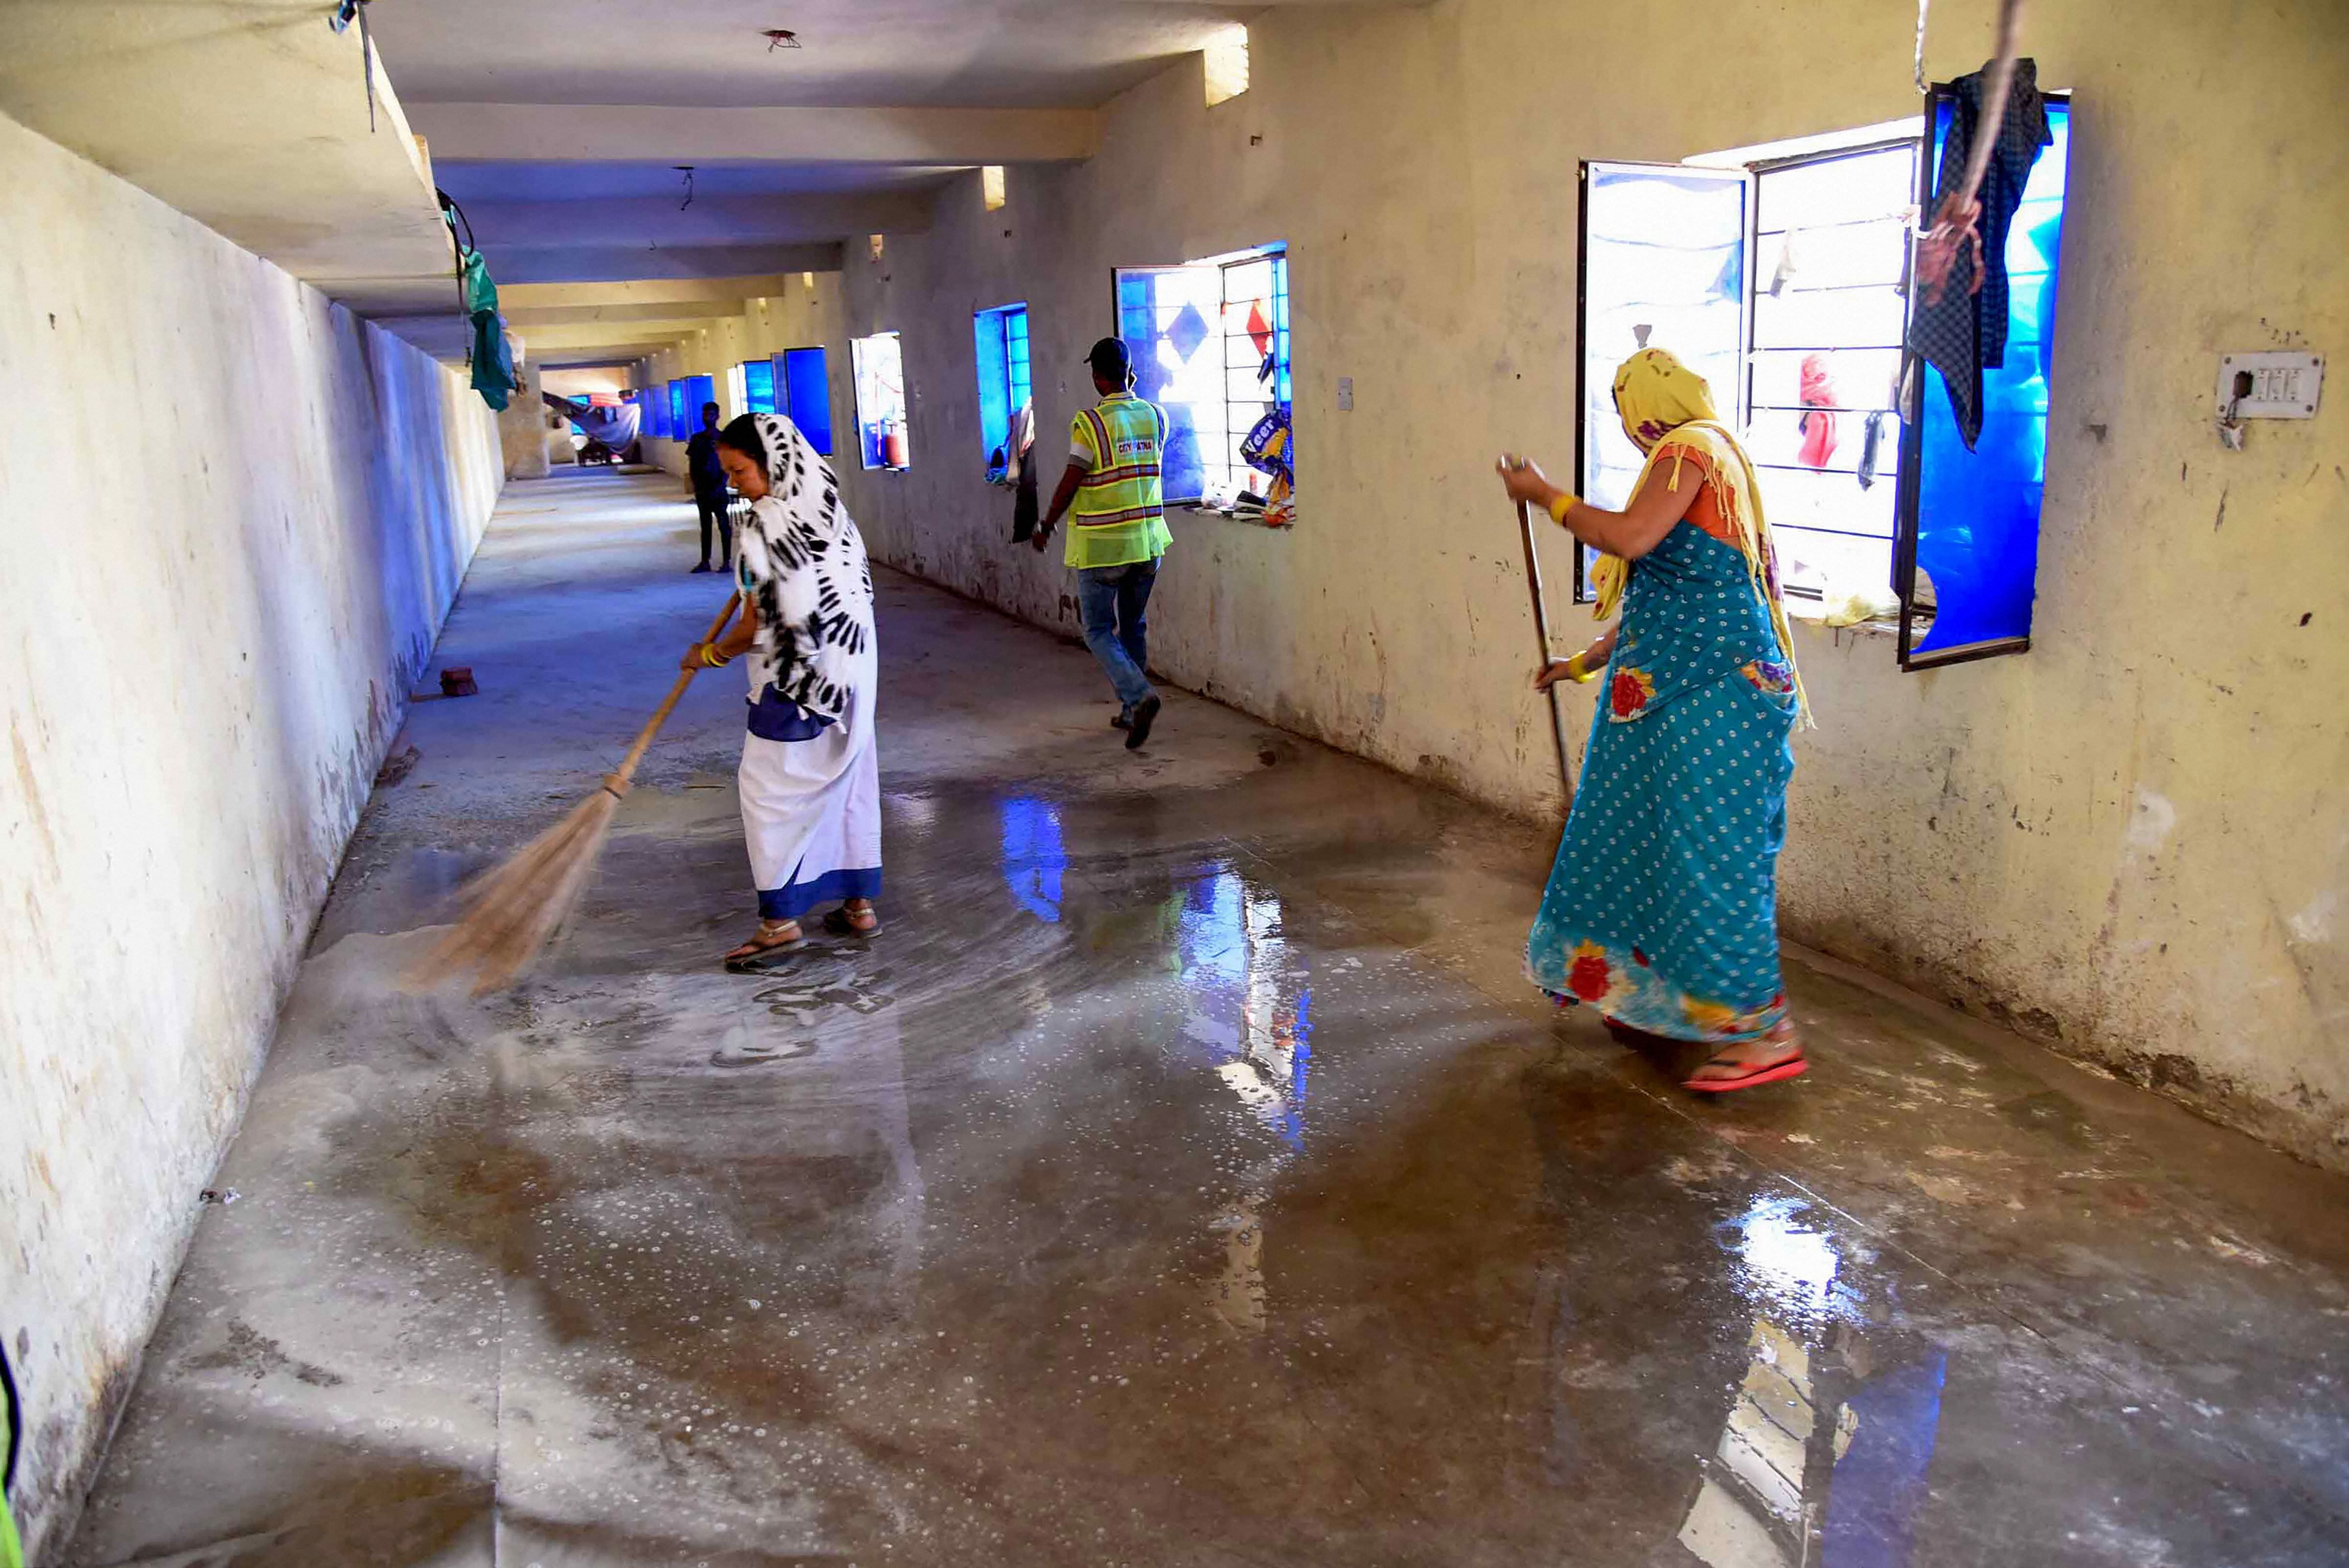 Patna: Municipal Corporation workers clean a Quarantine center during a nationwide lockdown in the wake of coronavirus outbreak. (Credit: PTI Photo)